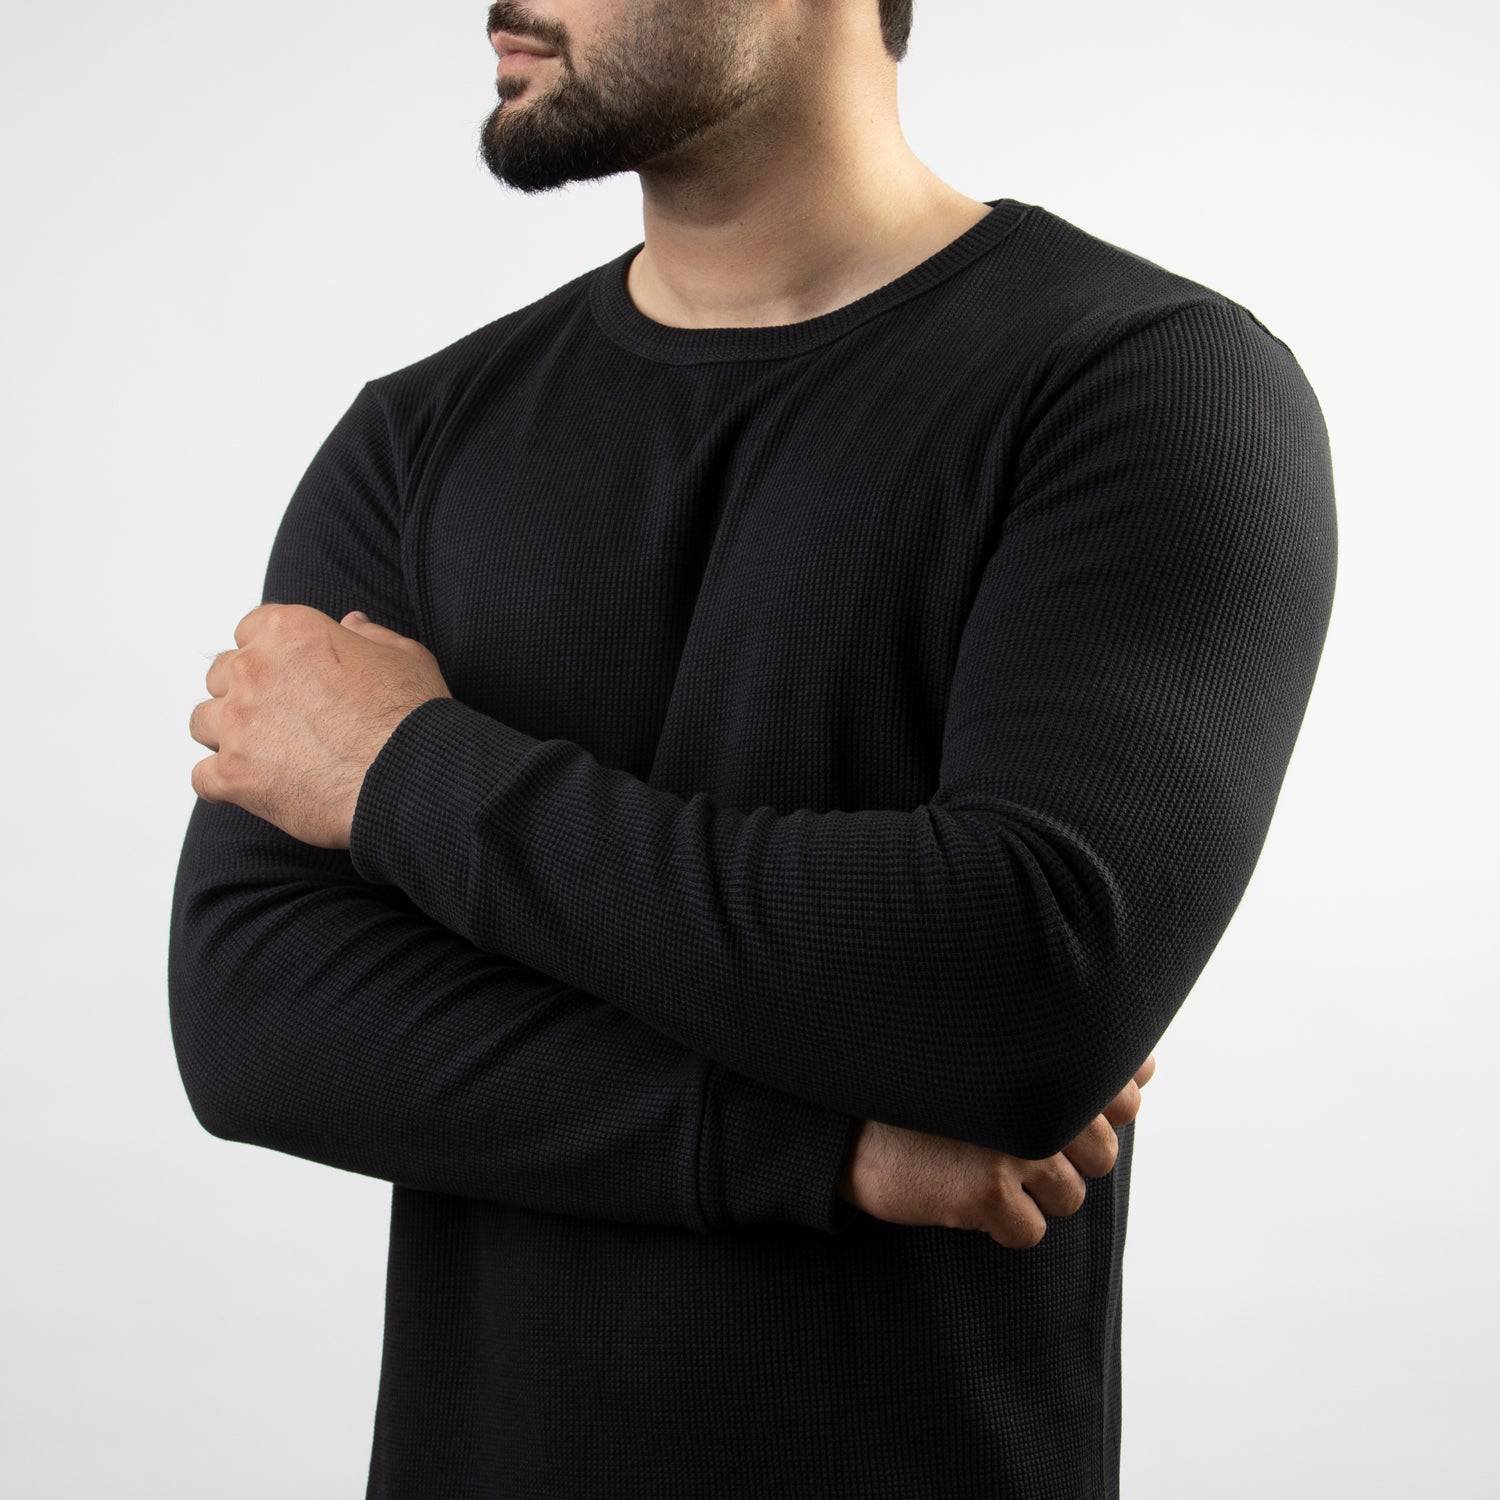 Black Thermal Full Sleeves Waffle-Knit - Valetica Sports